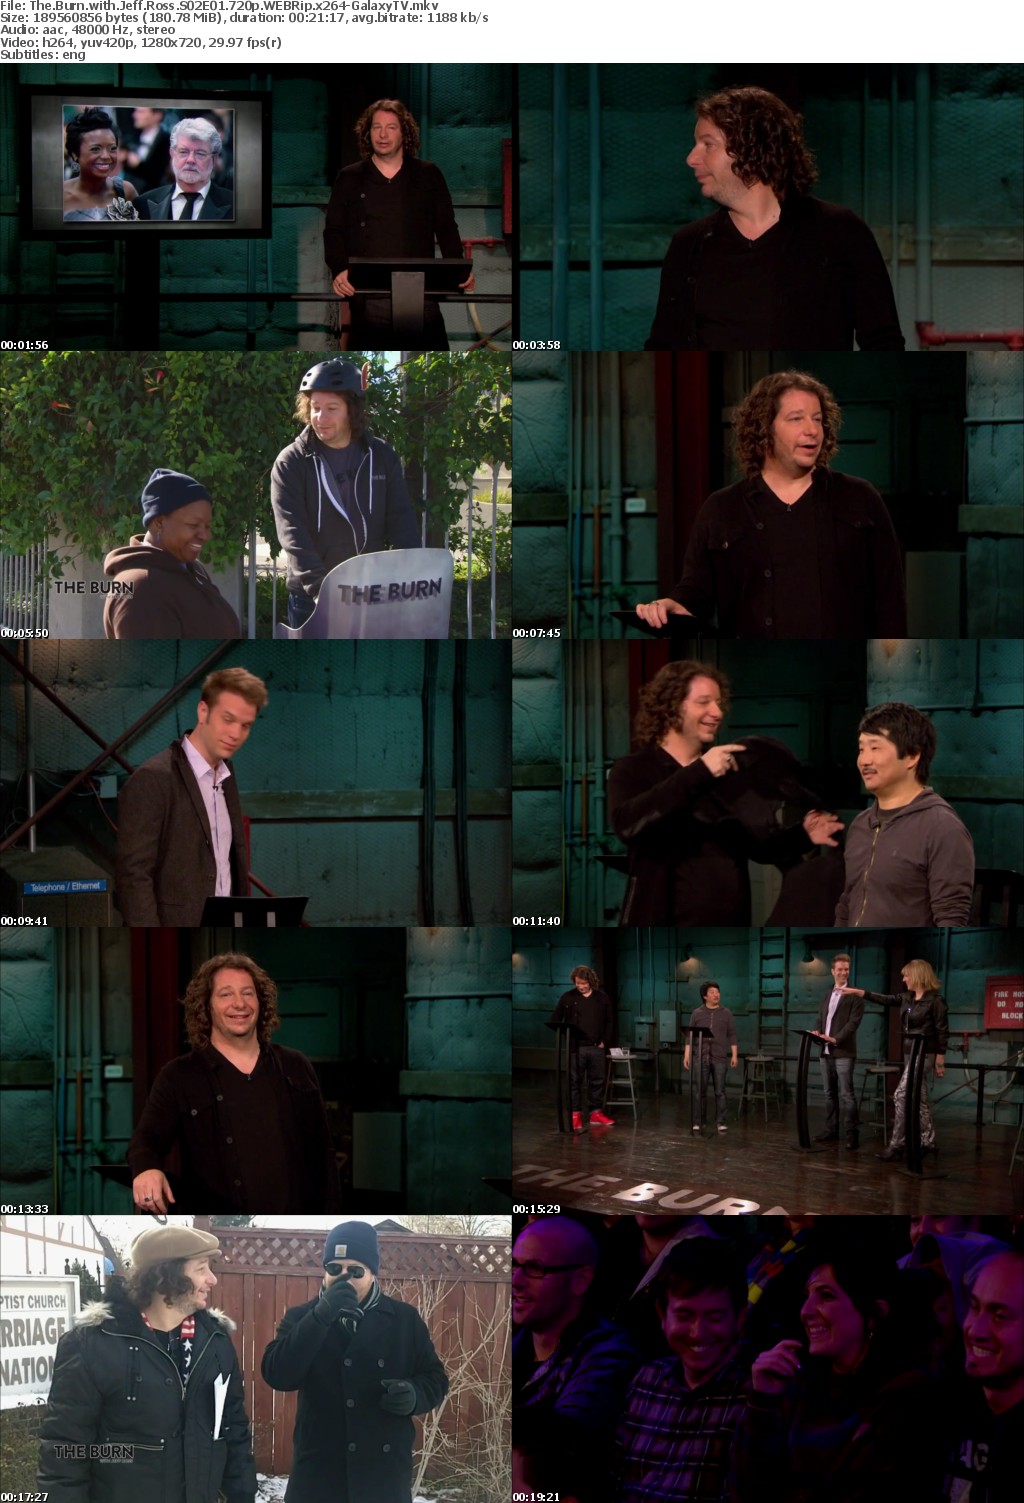 The Burn with Jeff Ross S02 COMPLETE 720p WEBRip x264-GalaxyTV